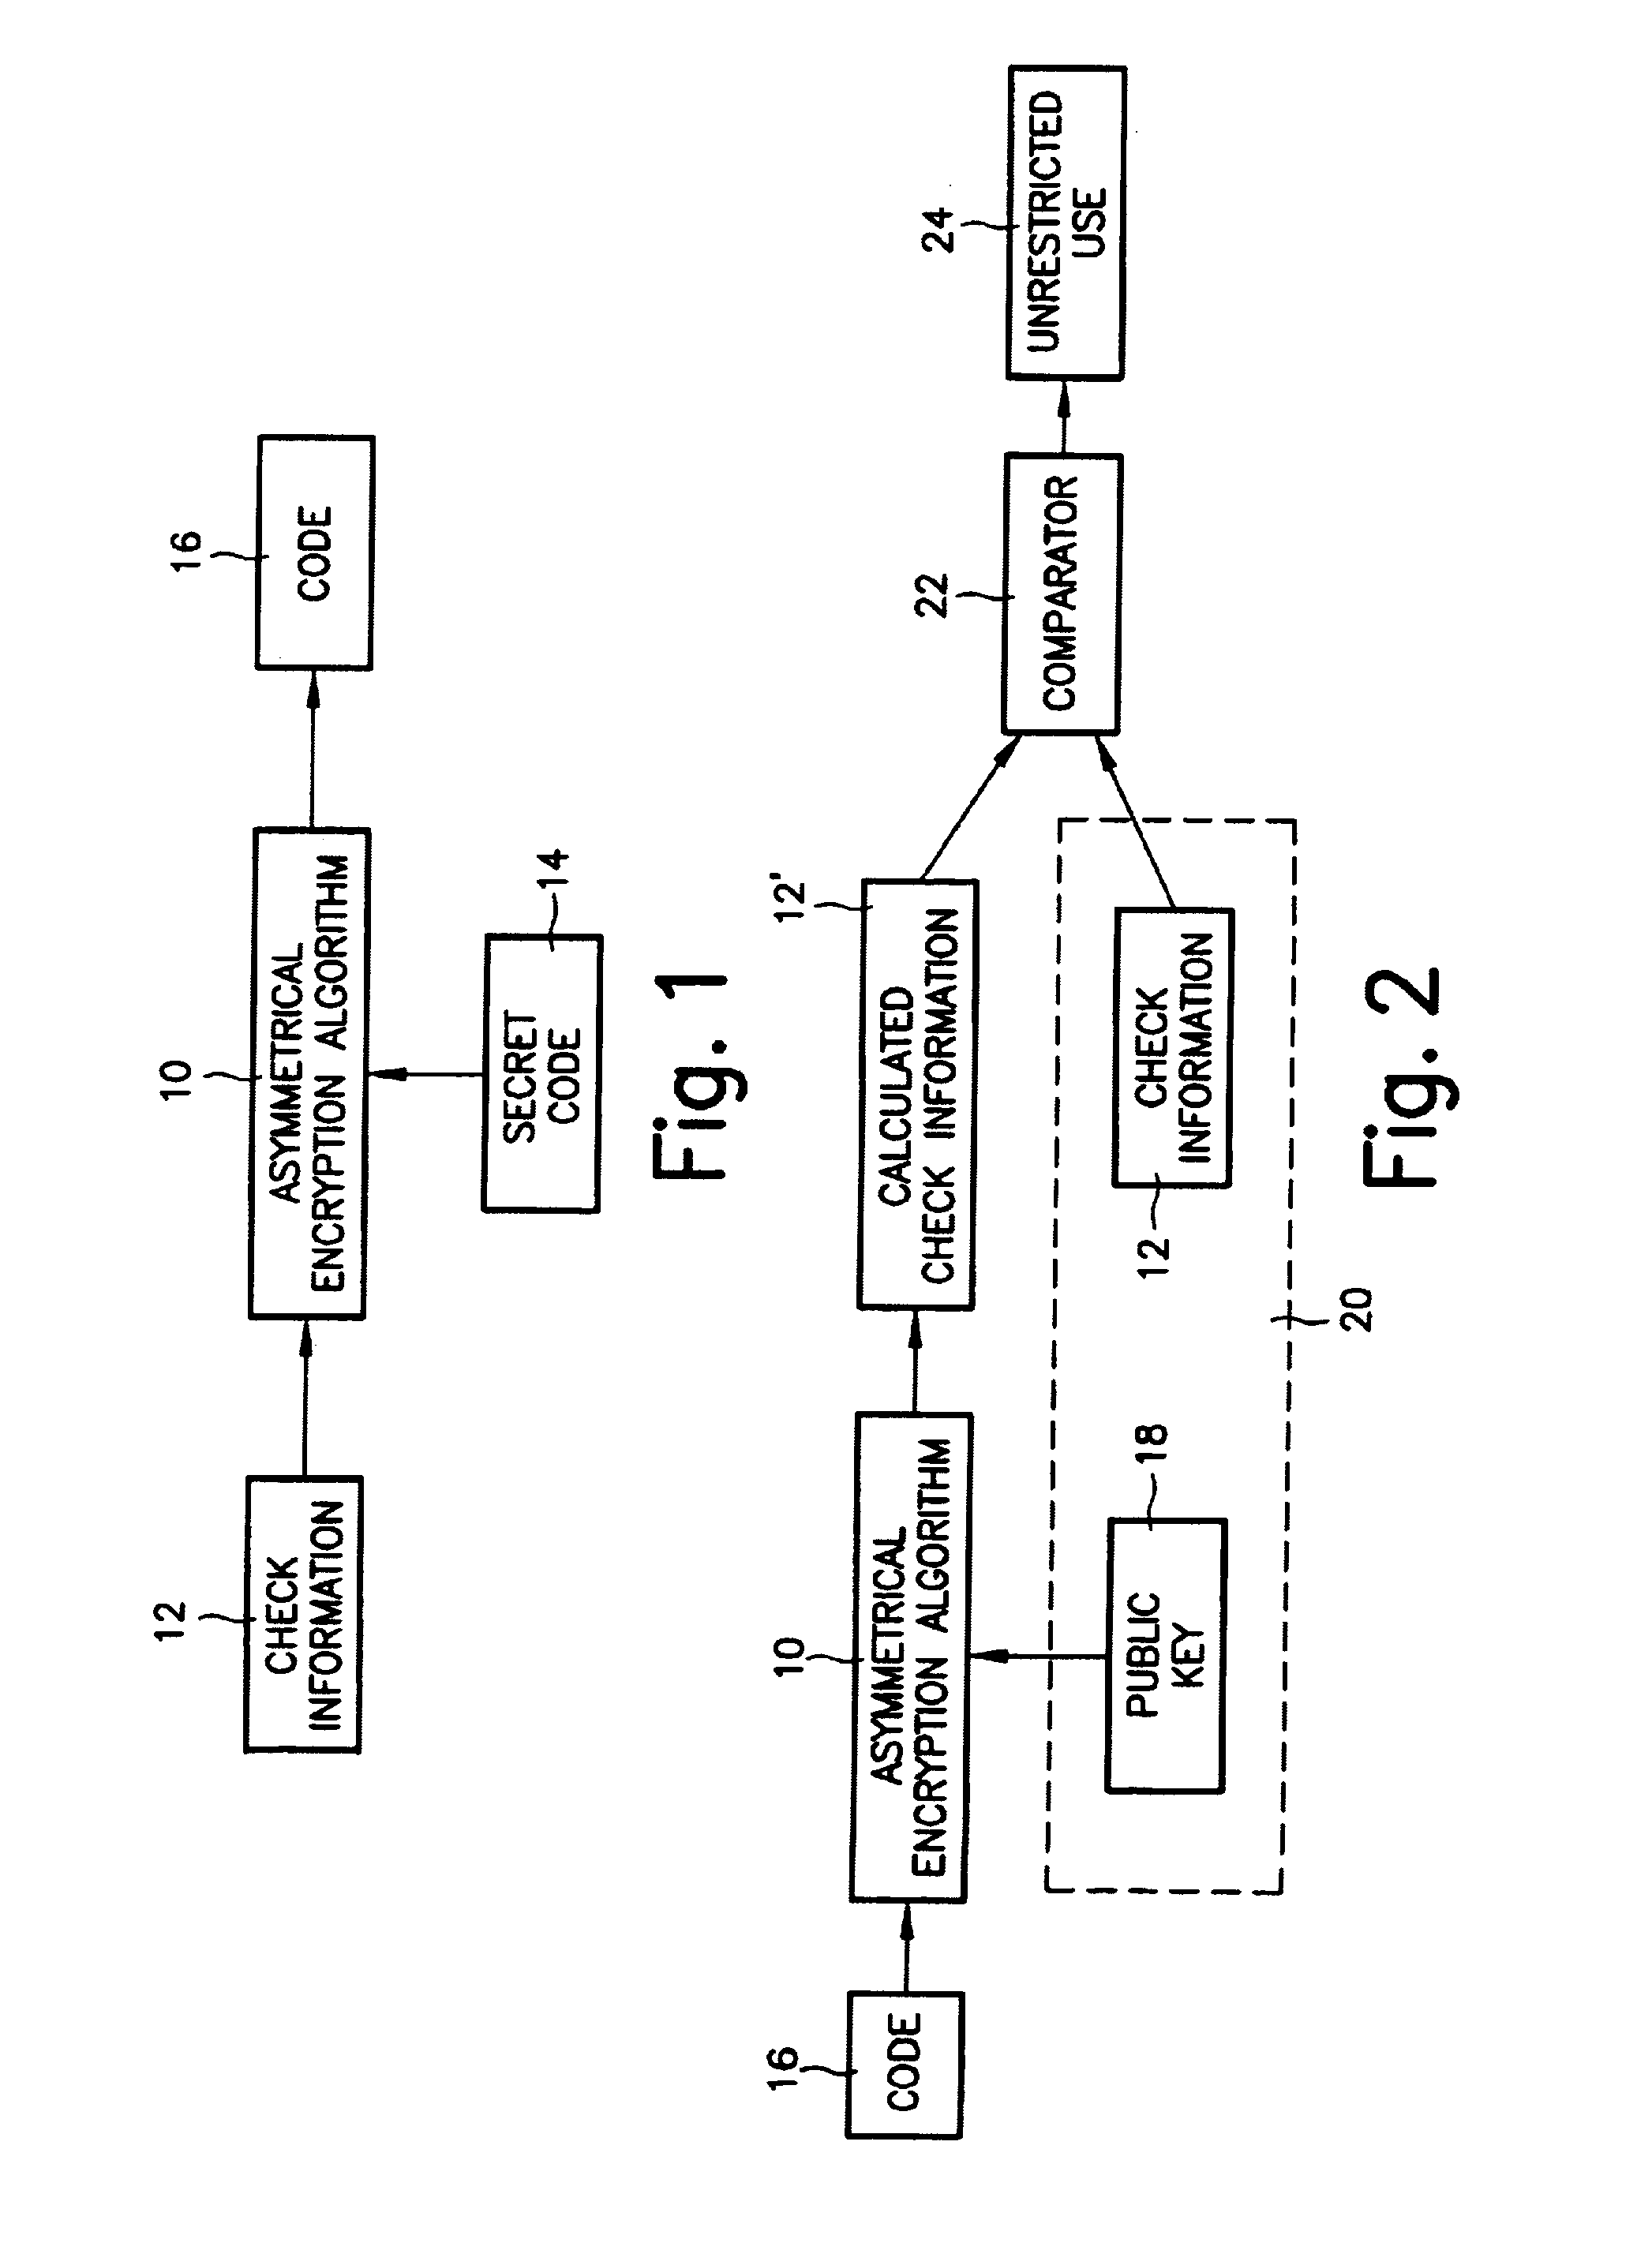 Method for protecting devices, specially car radios, against theft